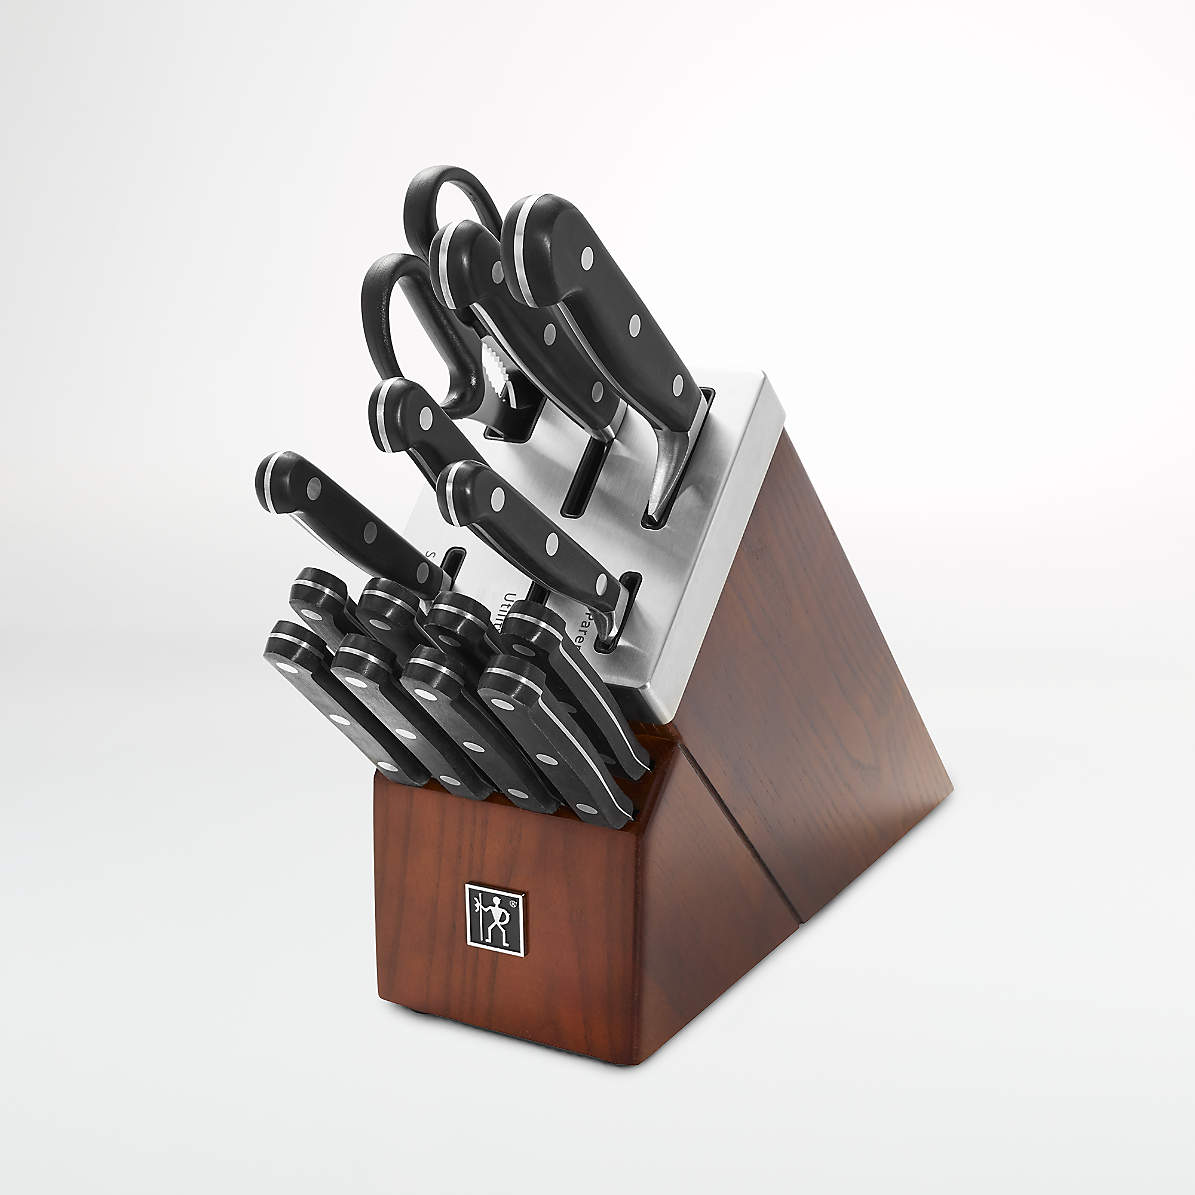 Henckels Forged Accent 20 Piece Self-Sharpening Knife Block Set, Off-White  Handles